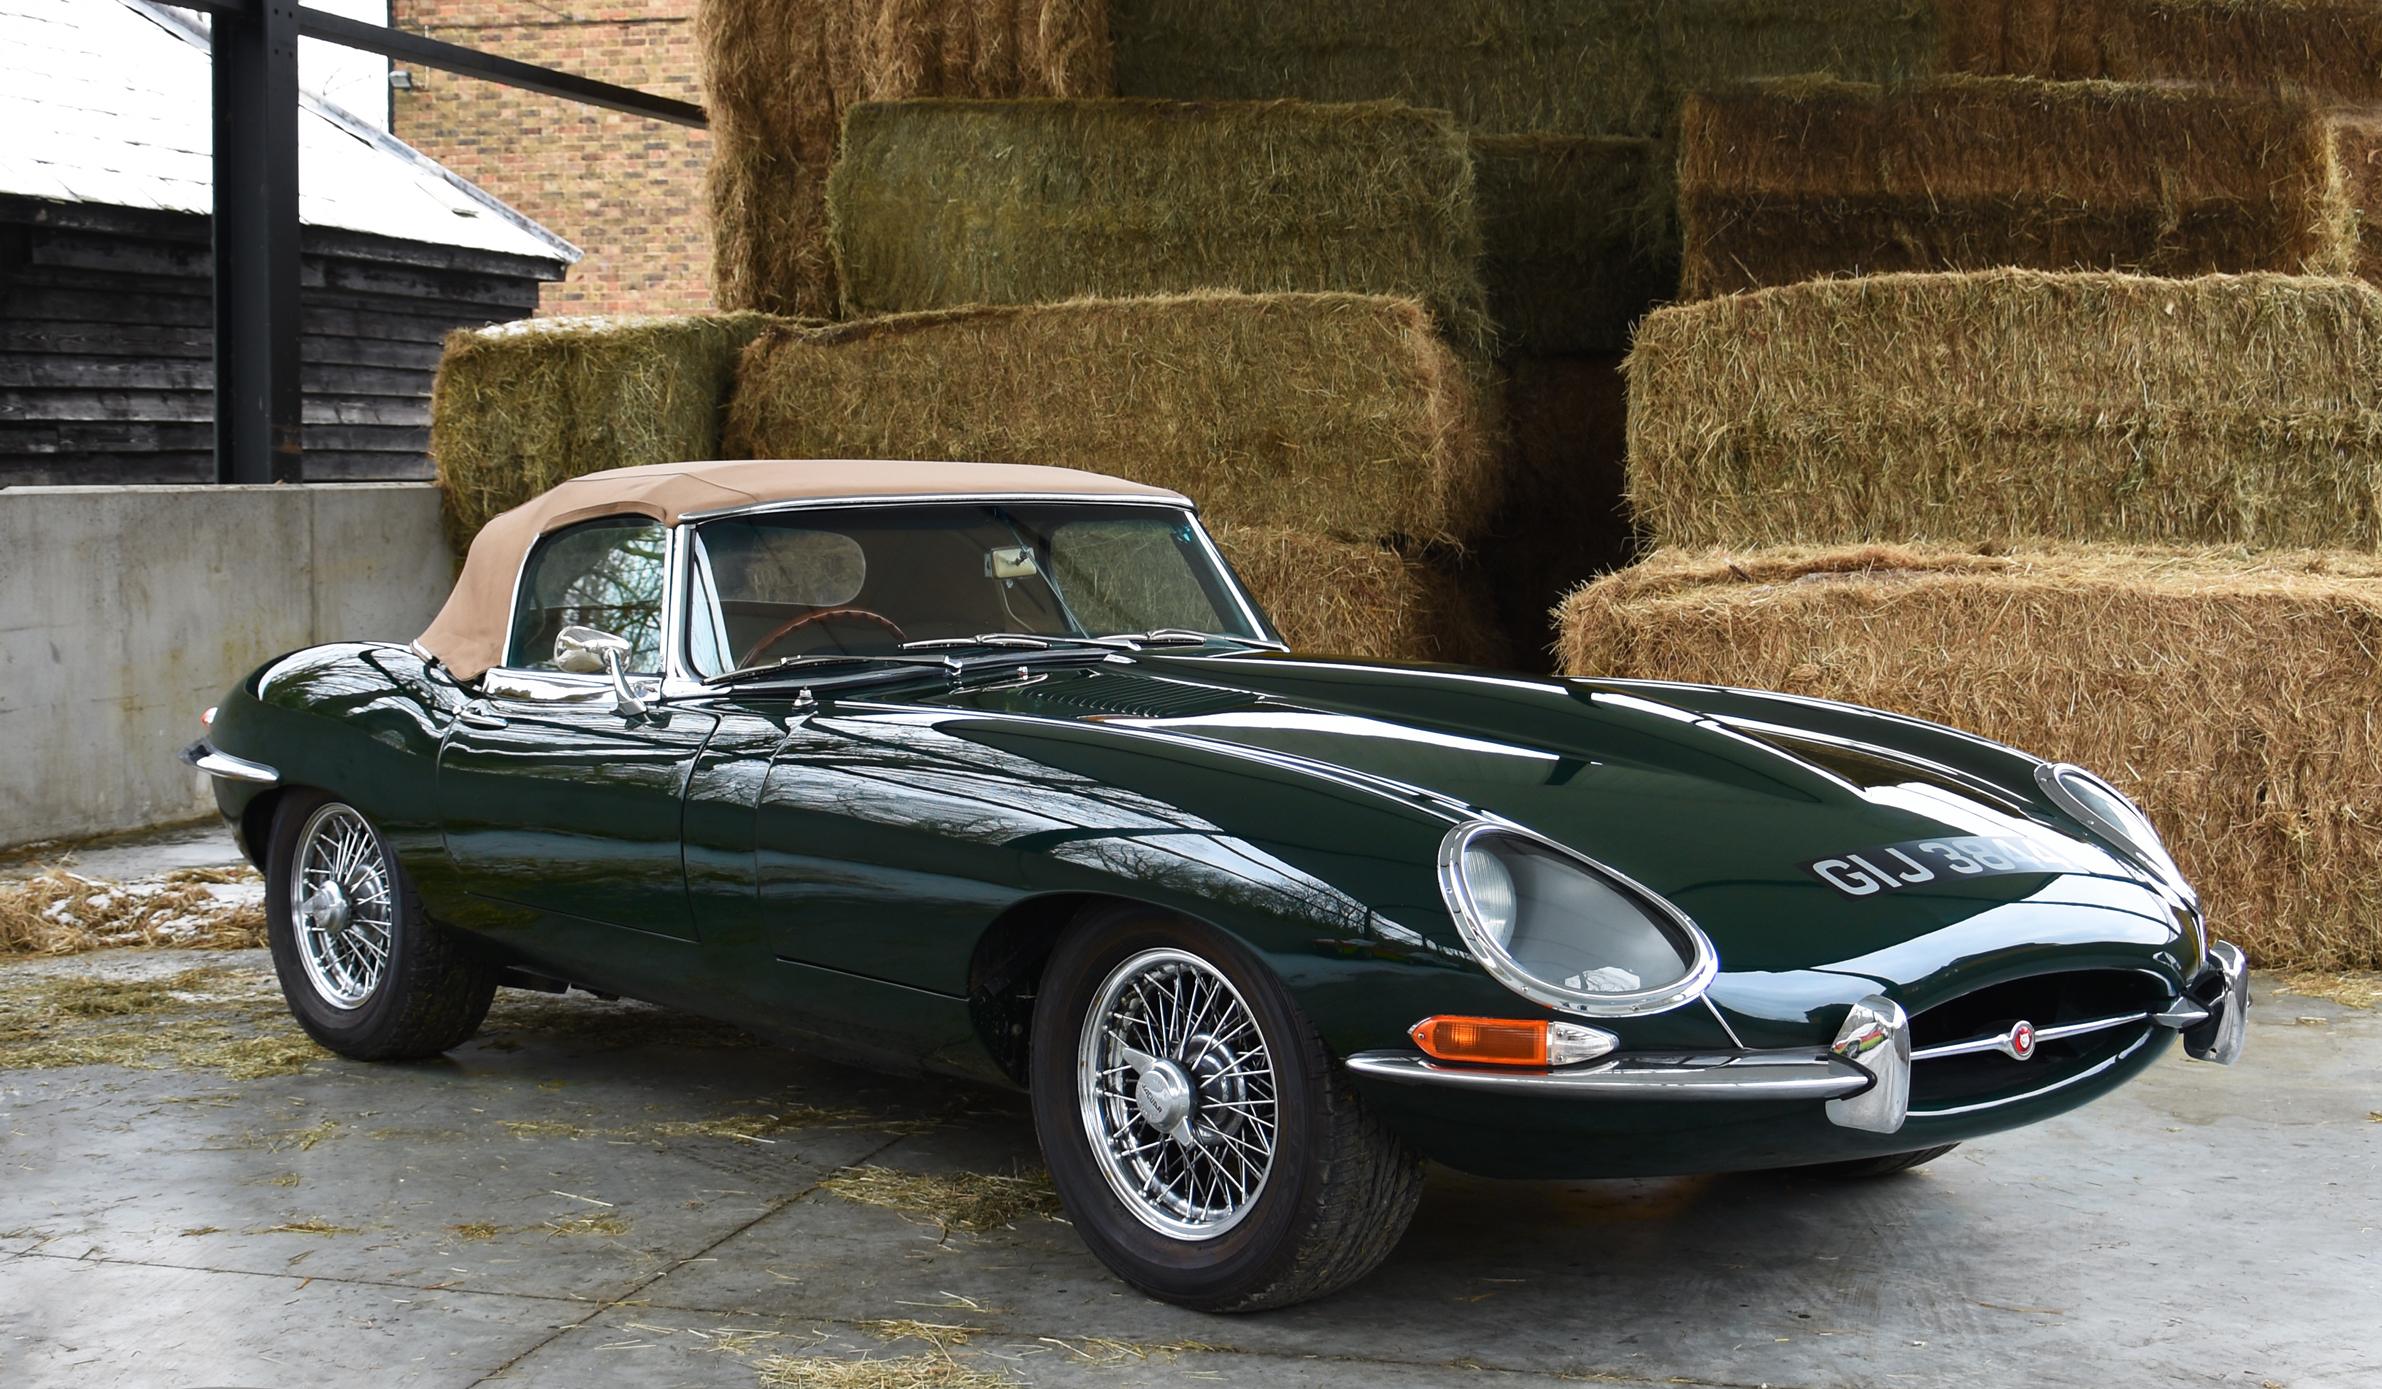 How much is a Jaguar E Type?